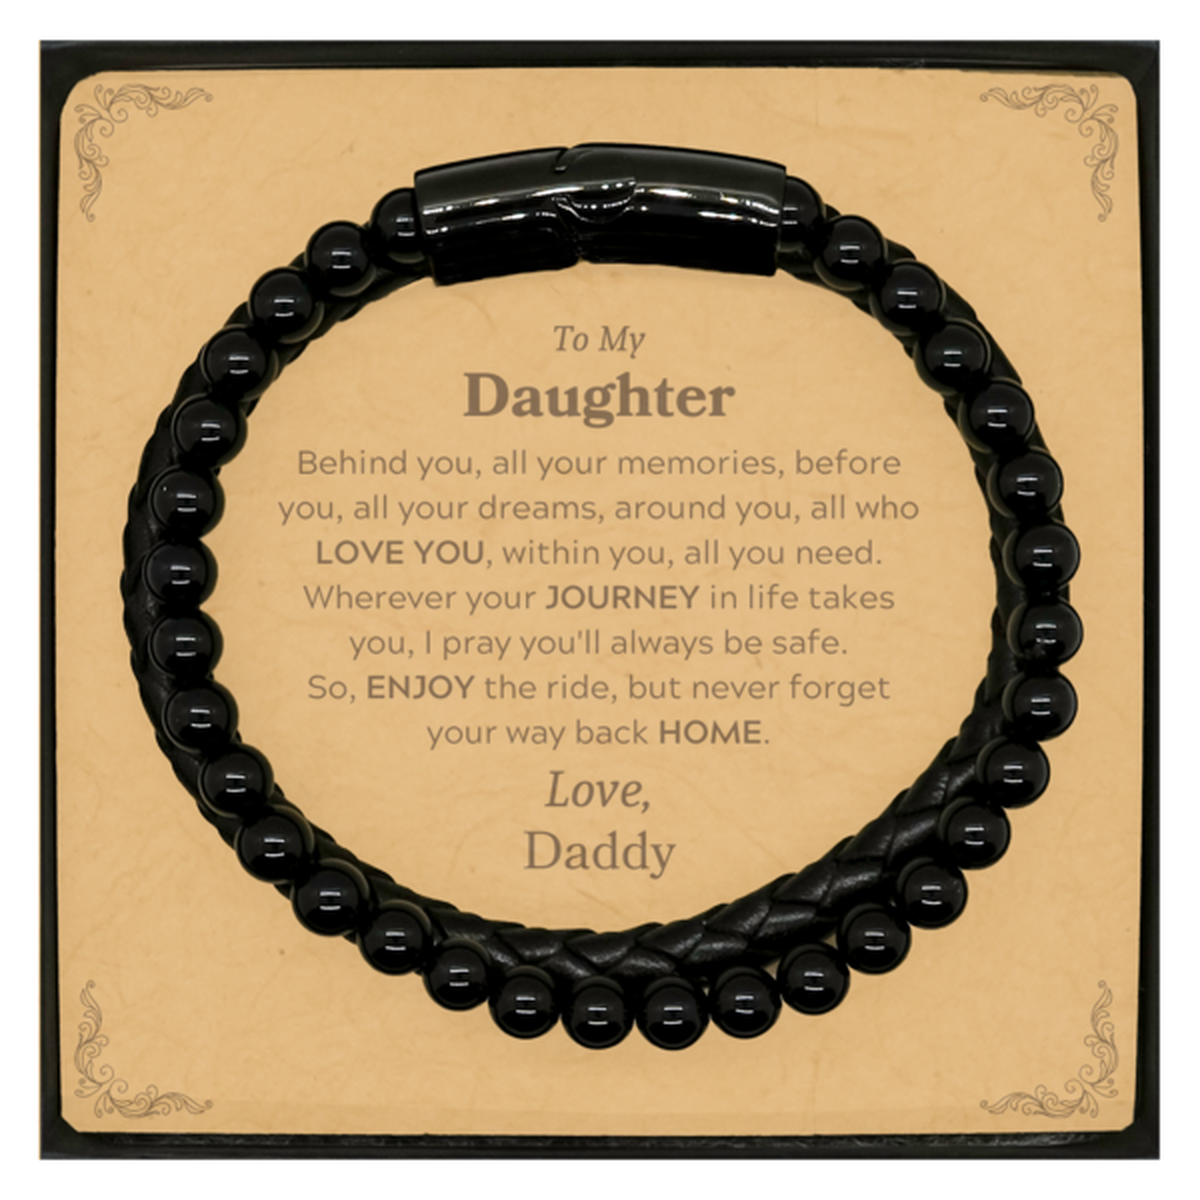 To My Daughter Graduation Gifts from Daddy, Daughter Stone Leather Bracelets Christmas Birthday Gifts for Daughter Behind you, all your memories, before you, all your dreams. Love, Daddy